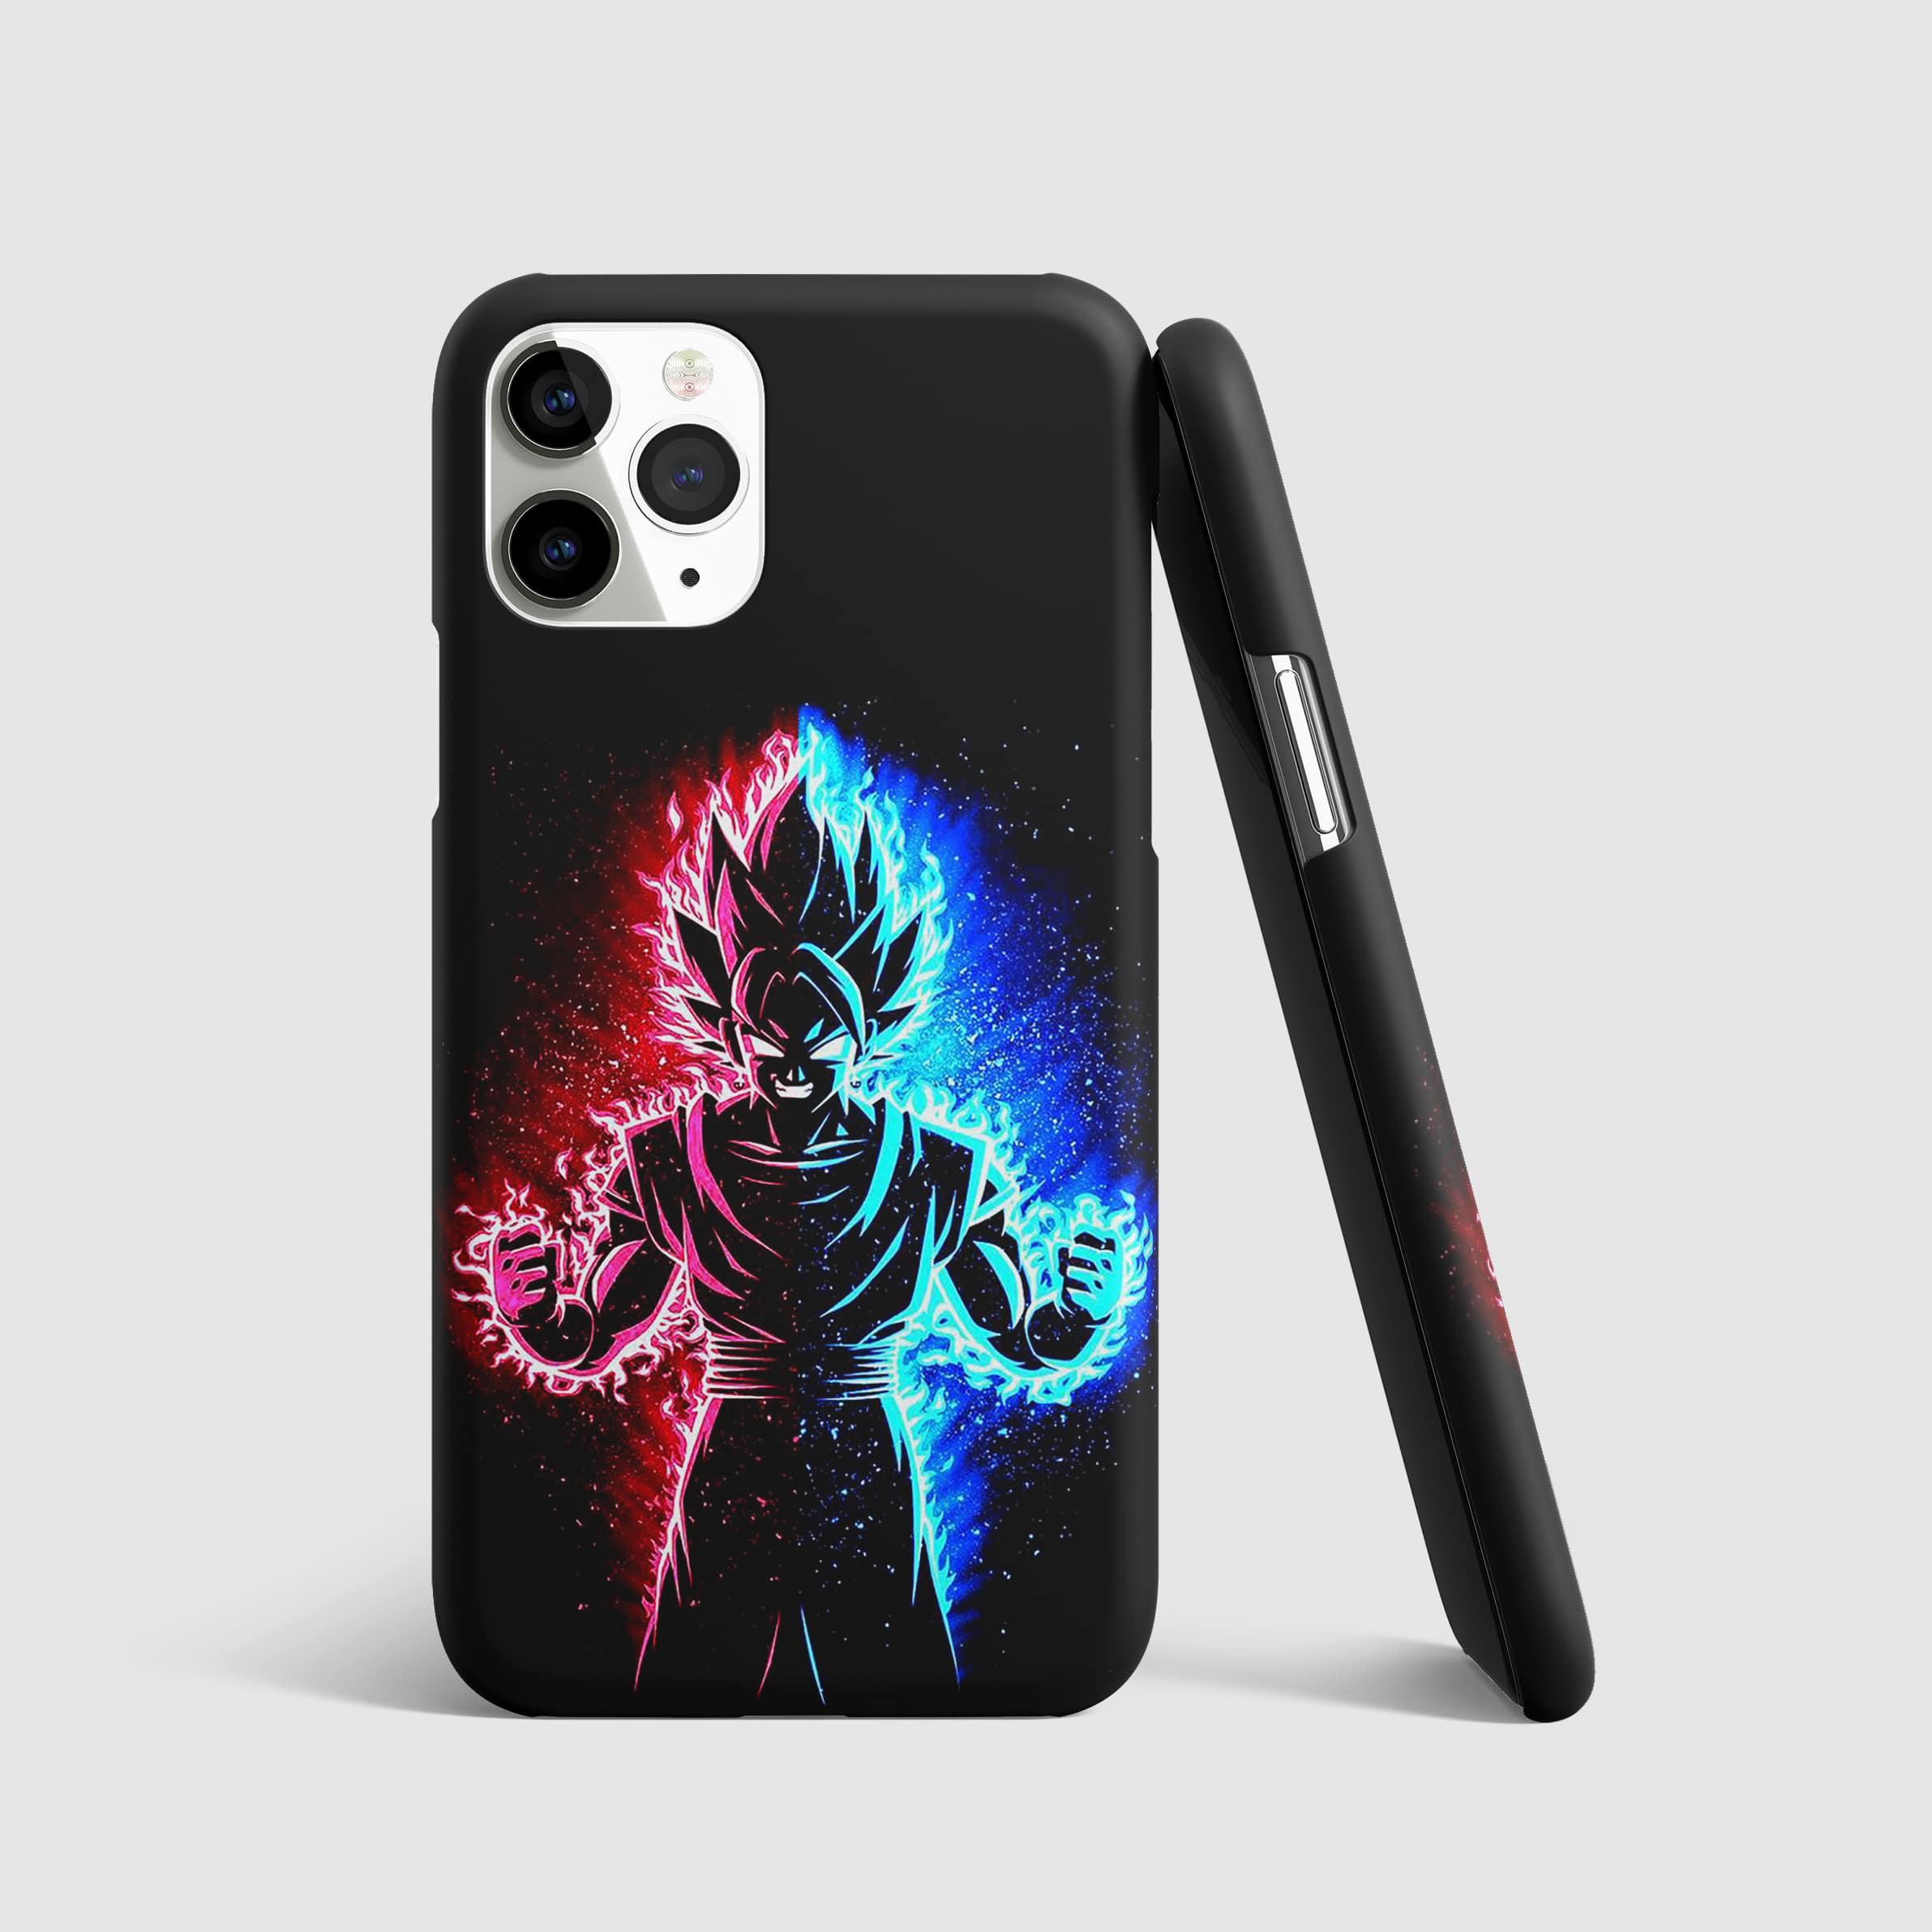 Goku and Vegeta fusion form on dynamic phone cover.